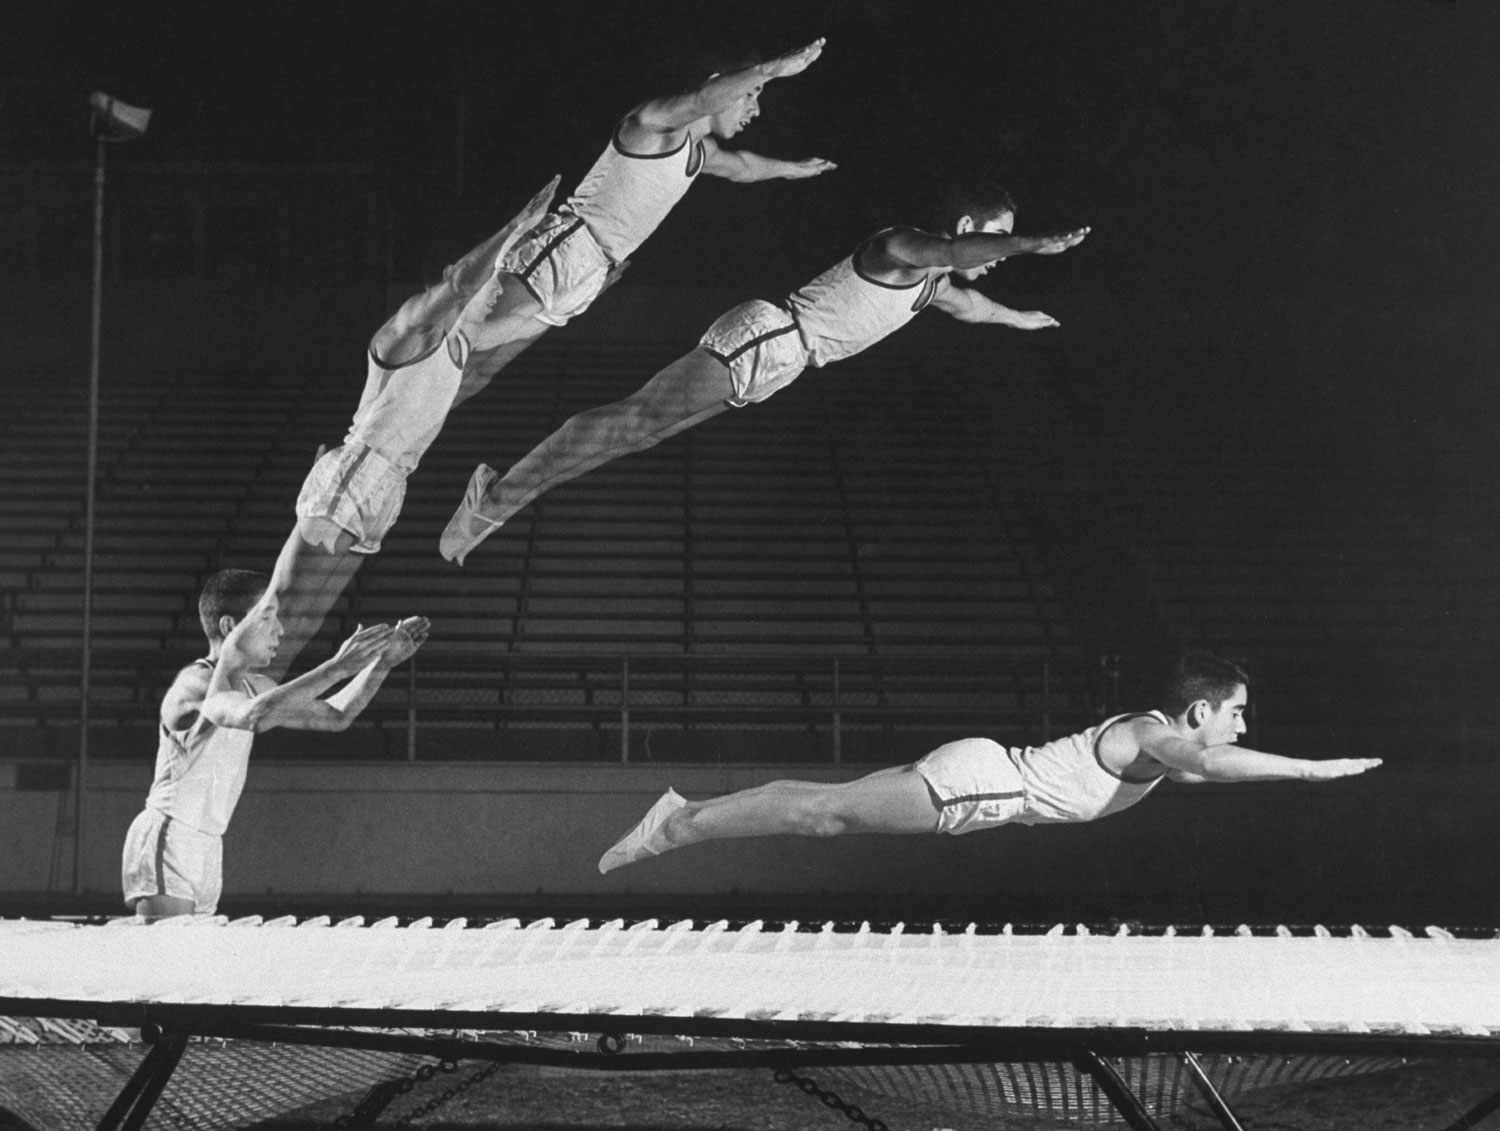 A multiple exposure shot of a gymnast jumping on a trampoline in 1960.